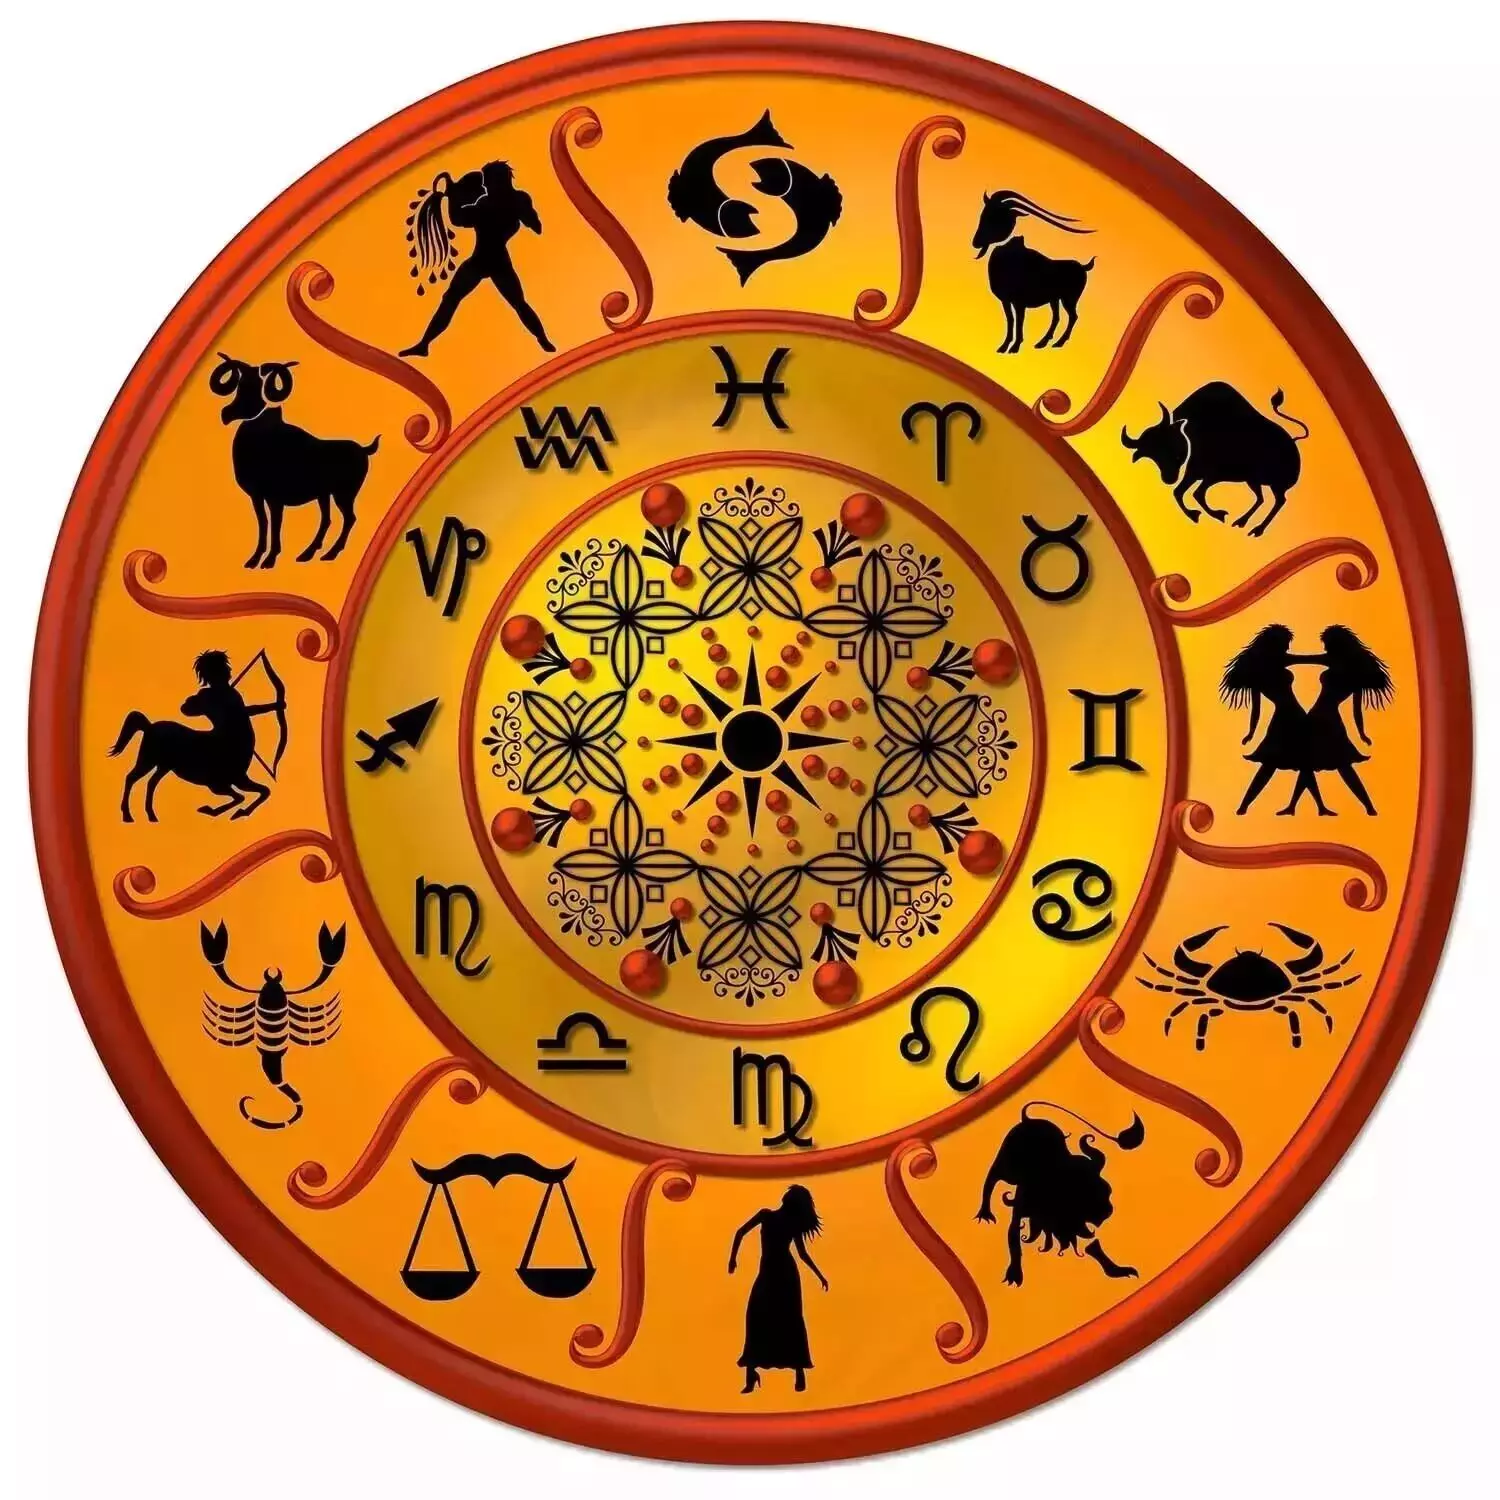 25 March  – Know your todays horoscope